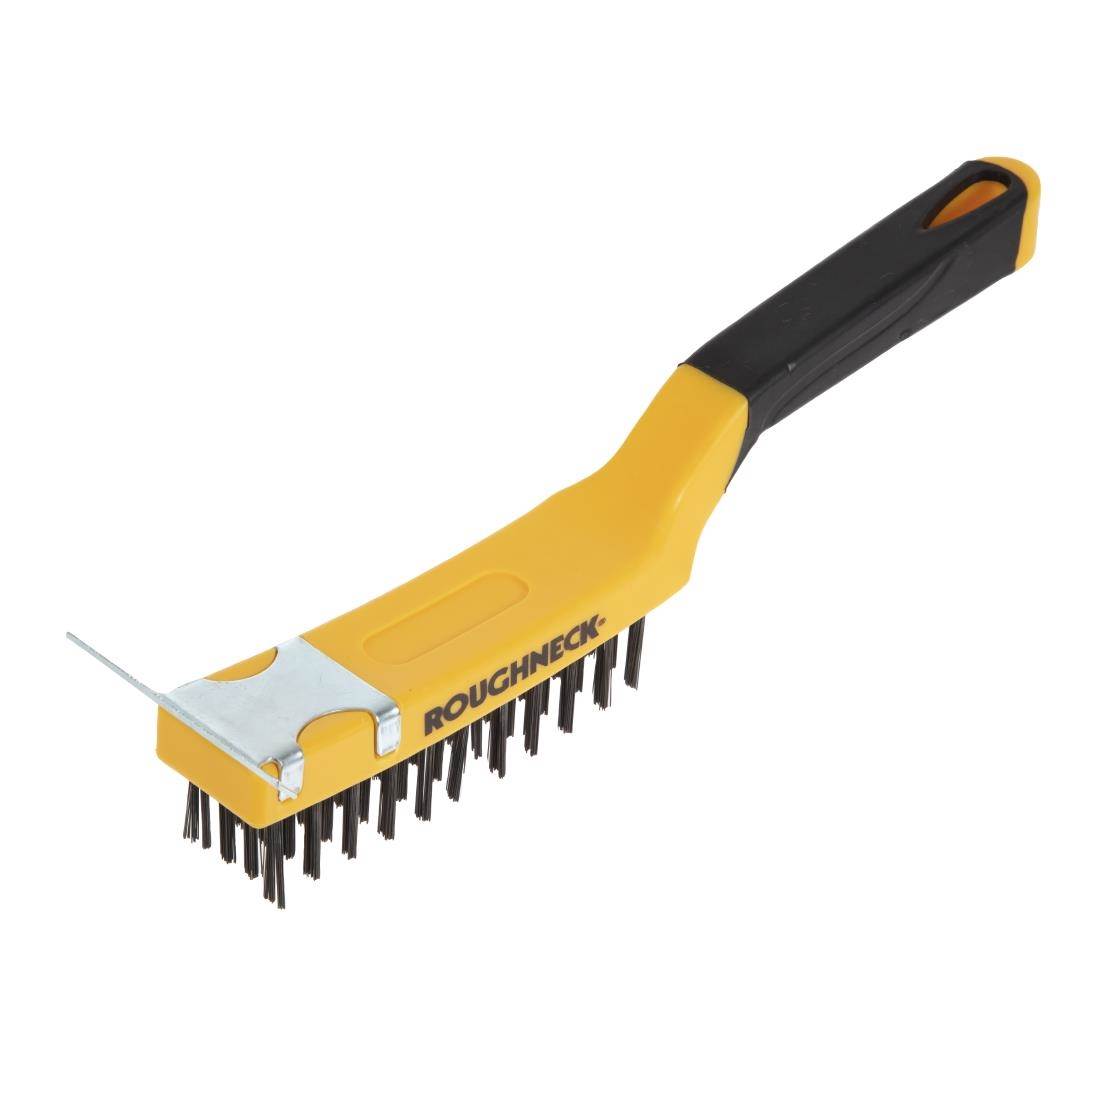 Roughneck Grill Brush with Scraper